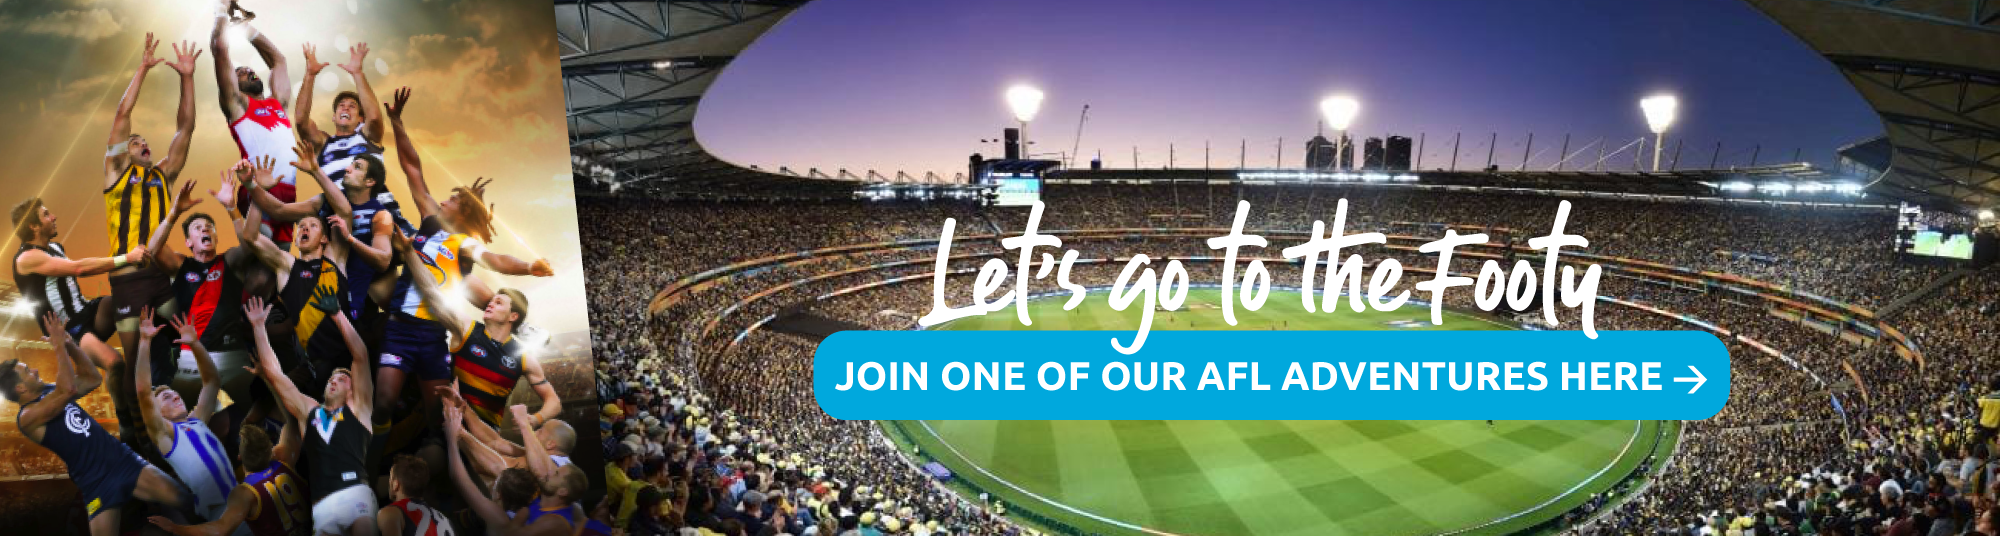 Let's go to the footy. Click here to join one of our adventures.